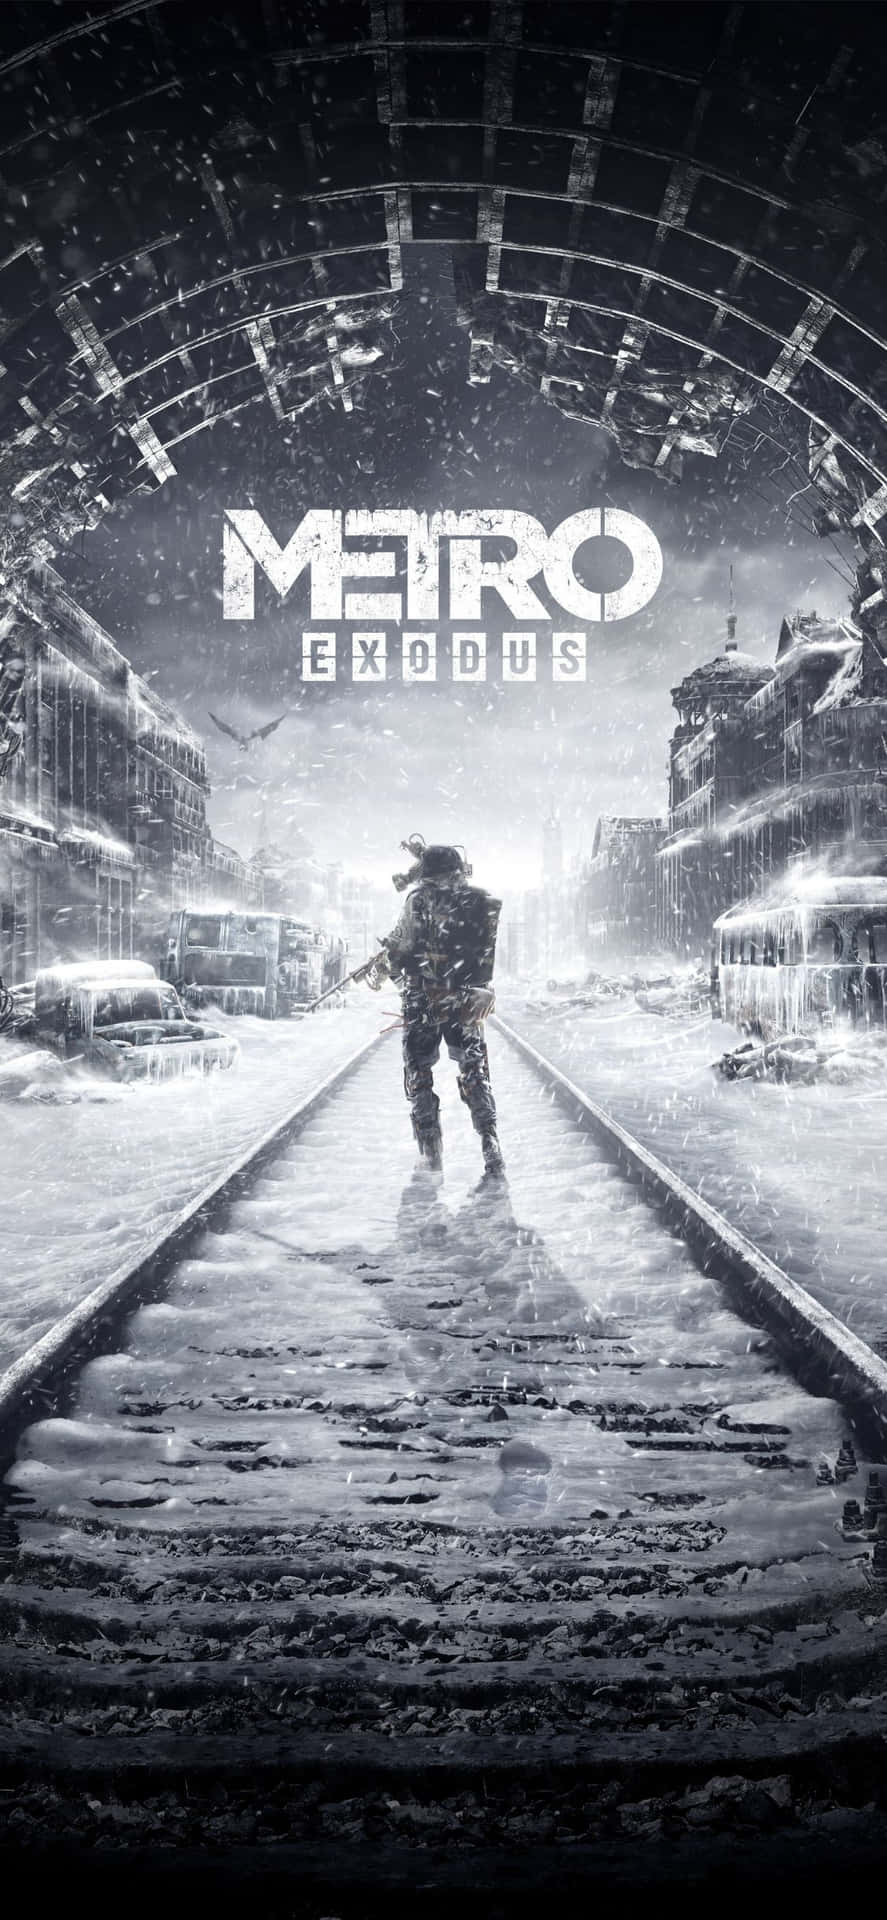 Dive deep into the post-apocalyptic world of Metro Exodus with the crisp visuals of iPhone X